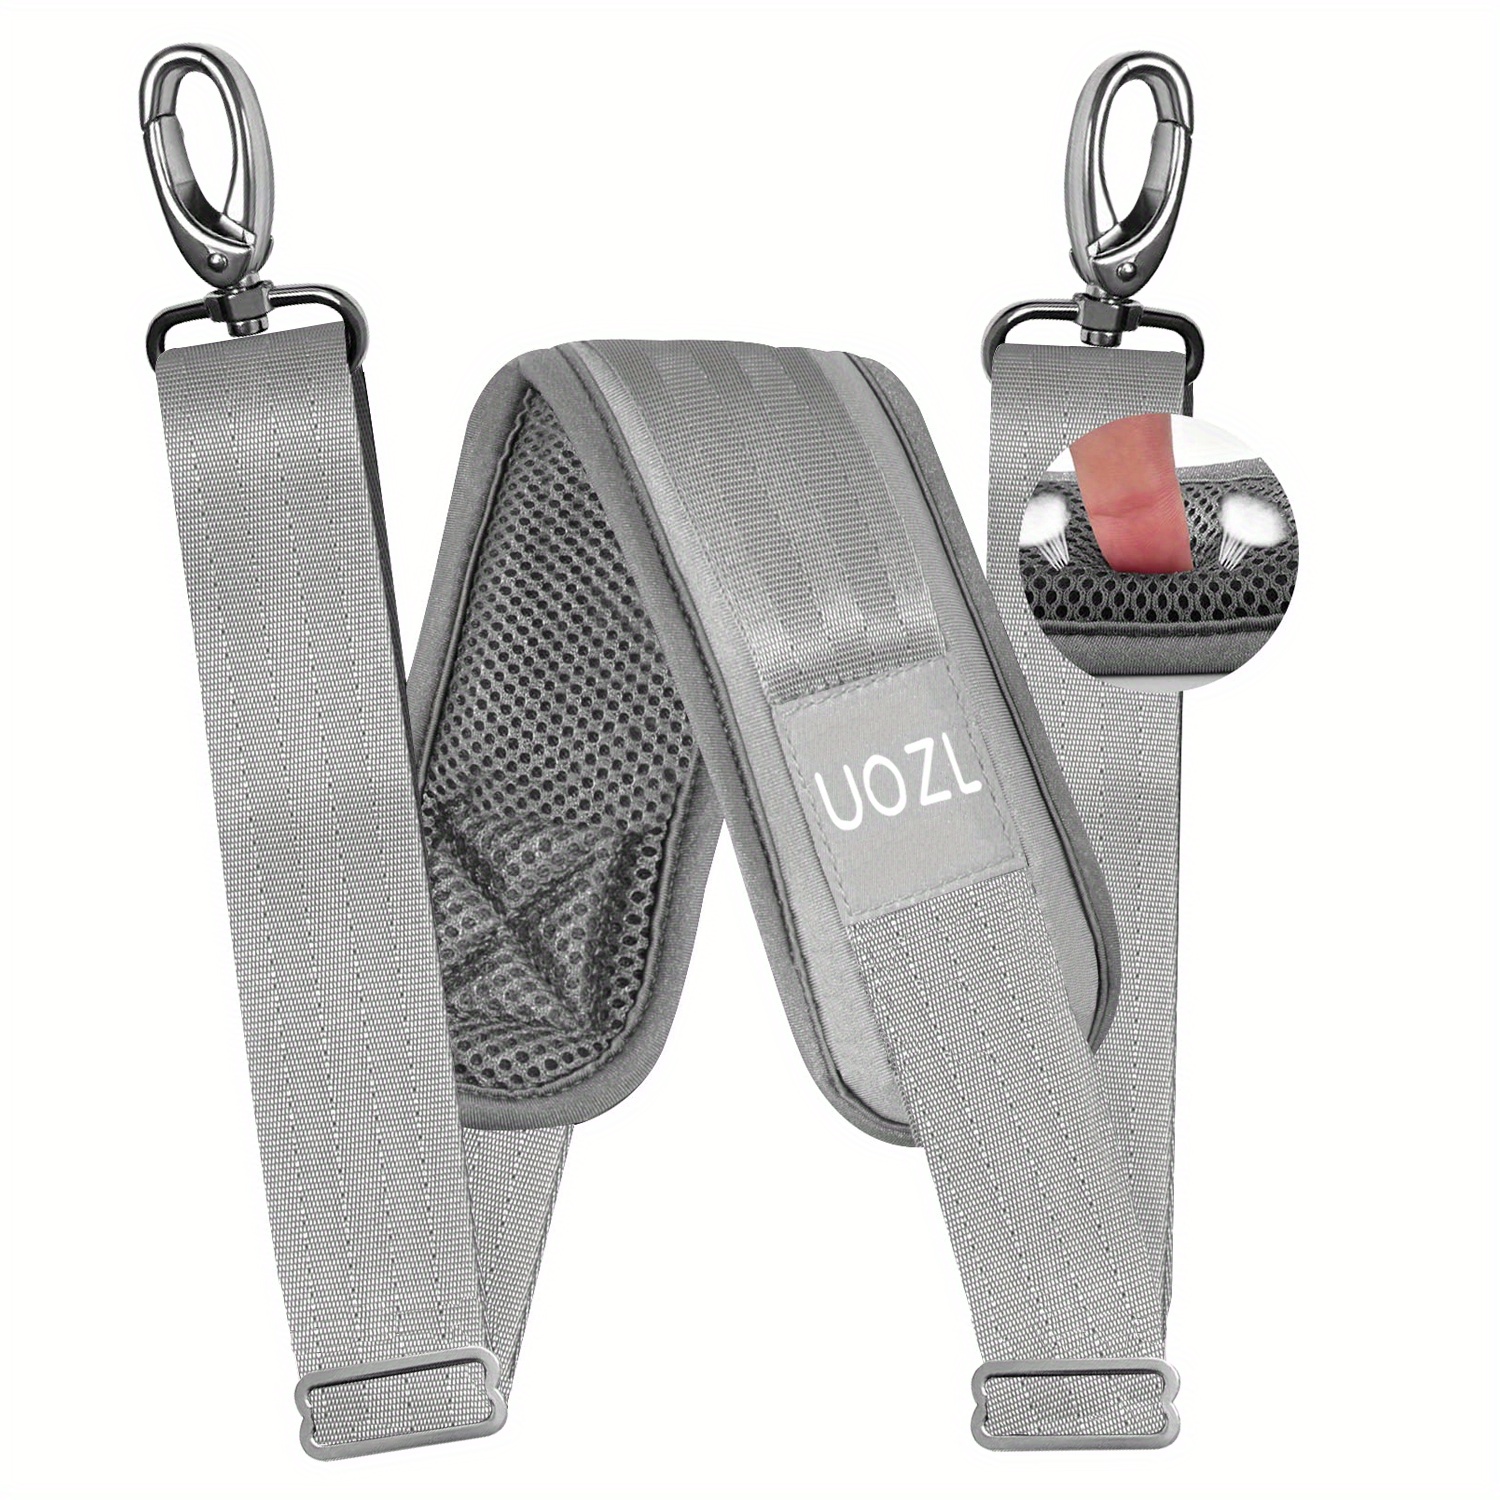 Shoulder Strap, Extra-thick Fixed Cushion Pad And Dual Clasps